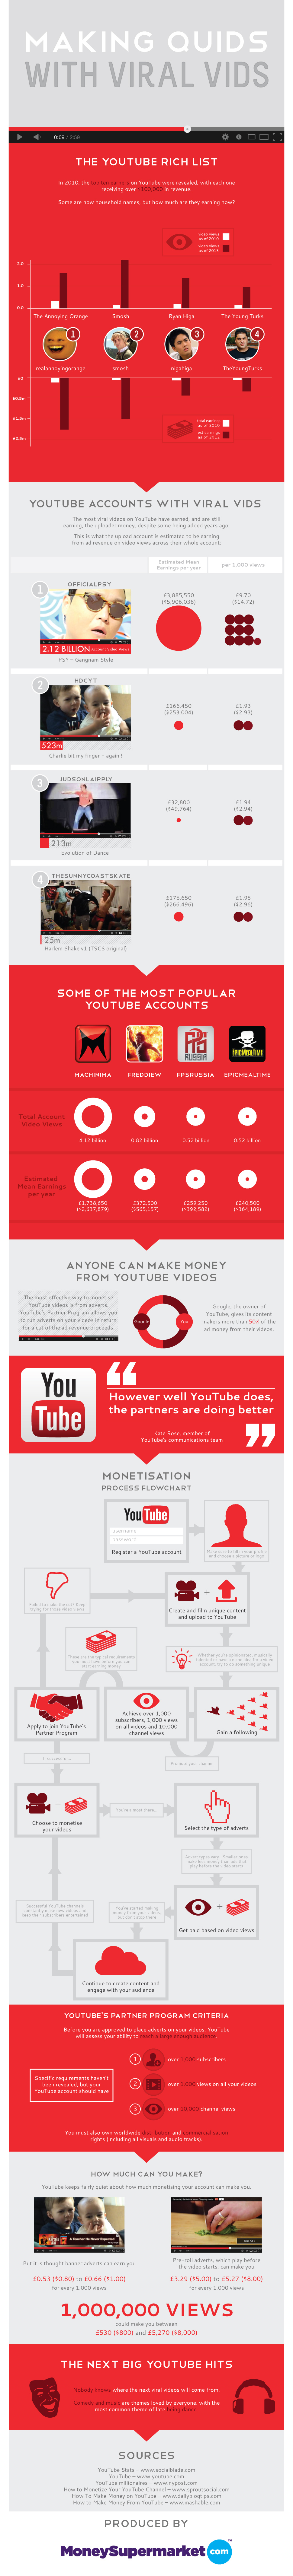 how to earn money from viral videos